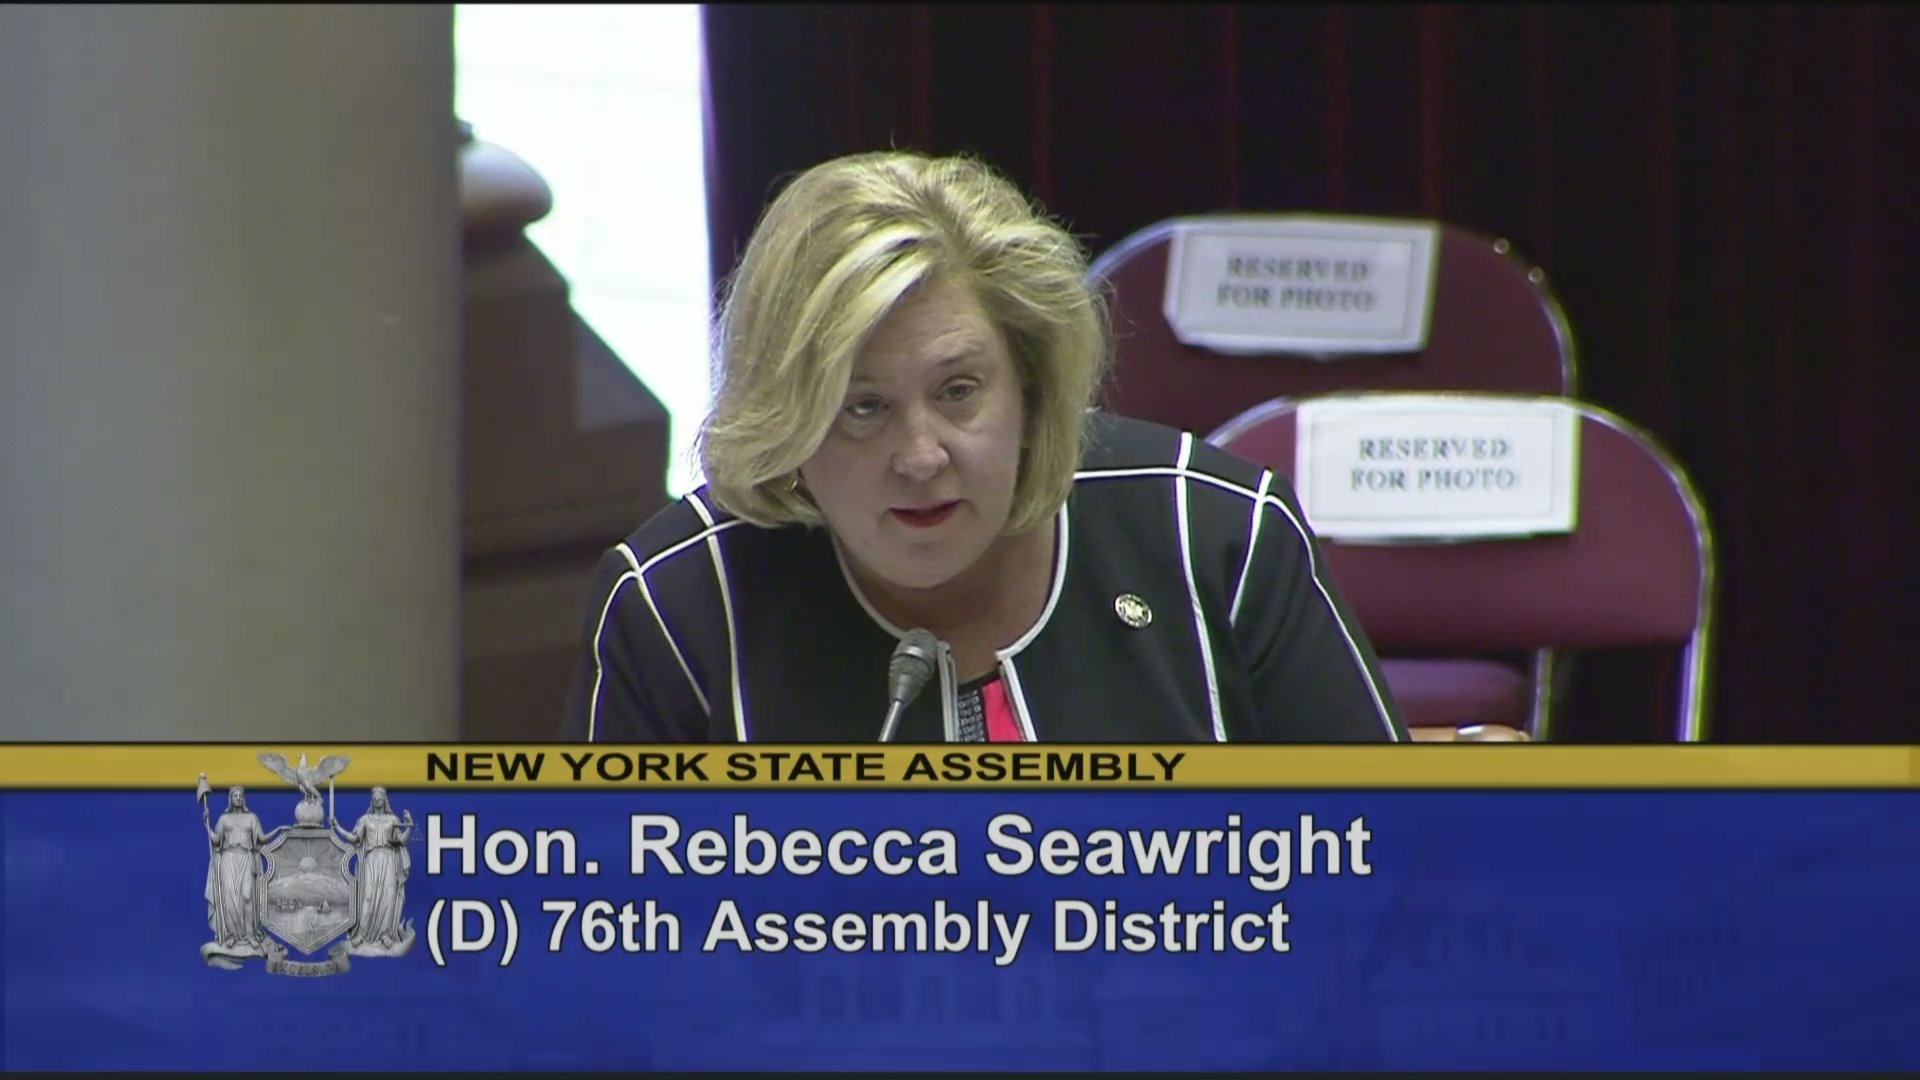 Seawright Introduces Constituent to Assembly